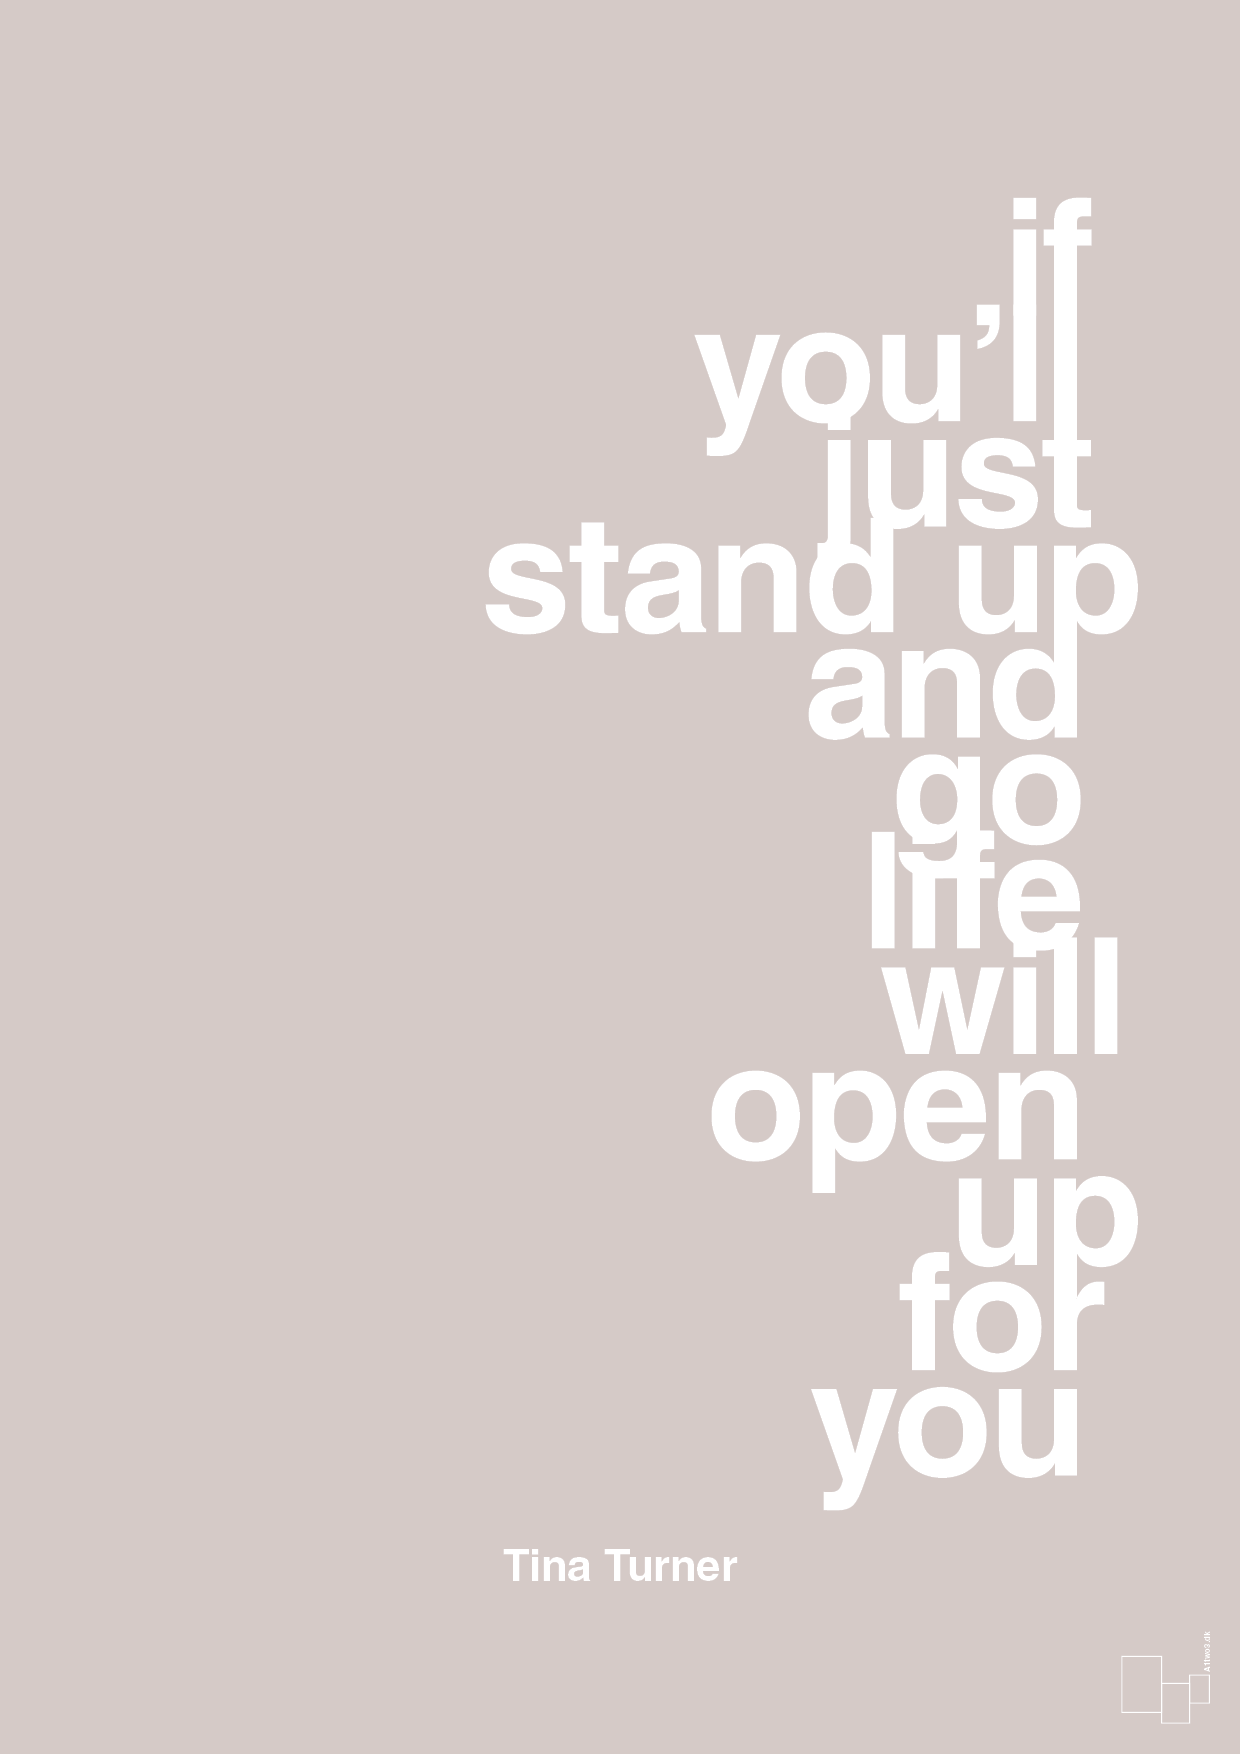 if you’ll just stand up and go life will open up for you - Plakat med Citater i Broken Beige